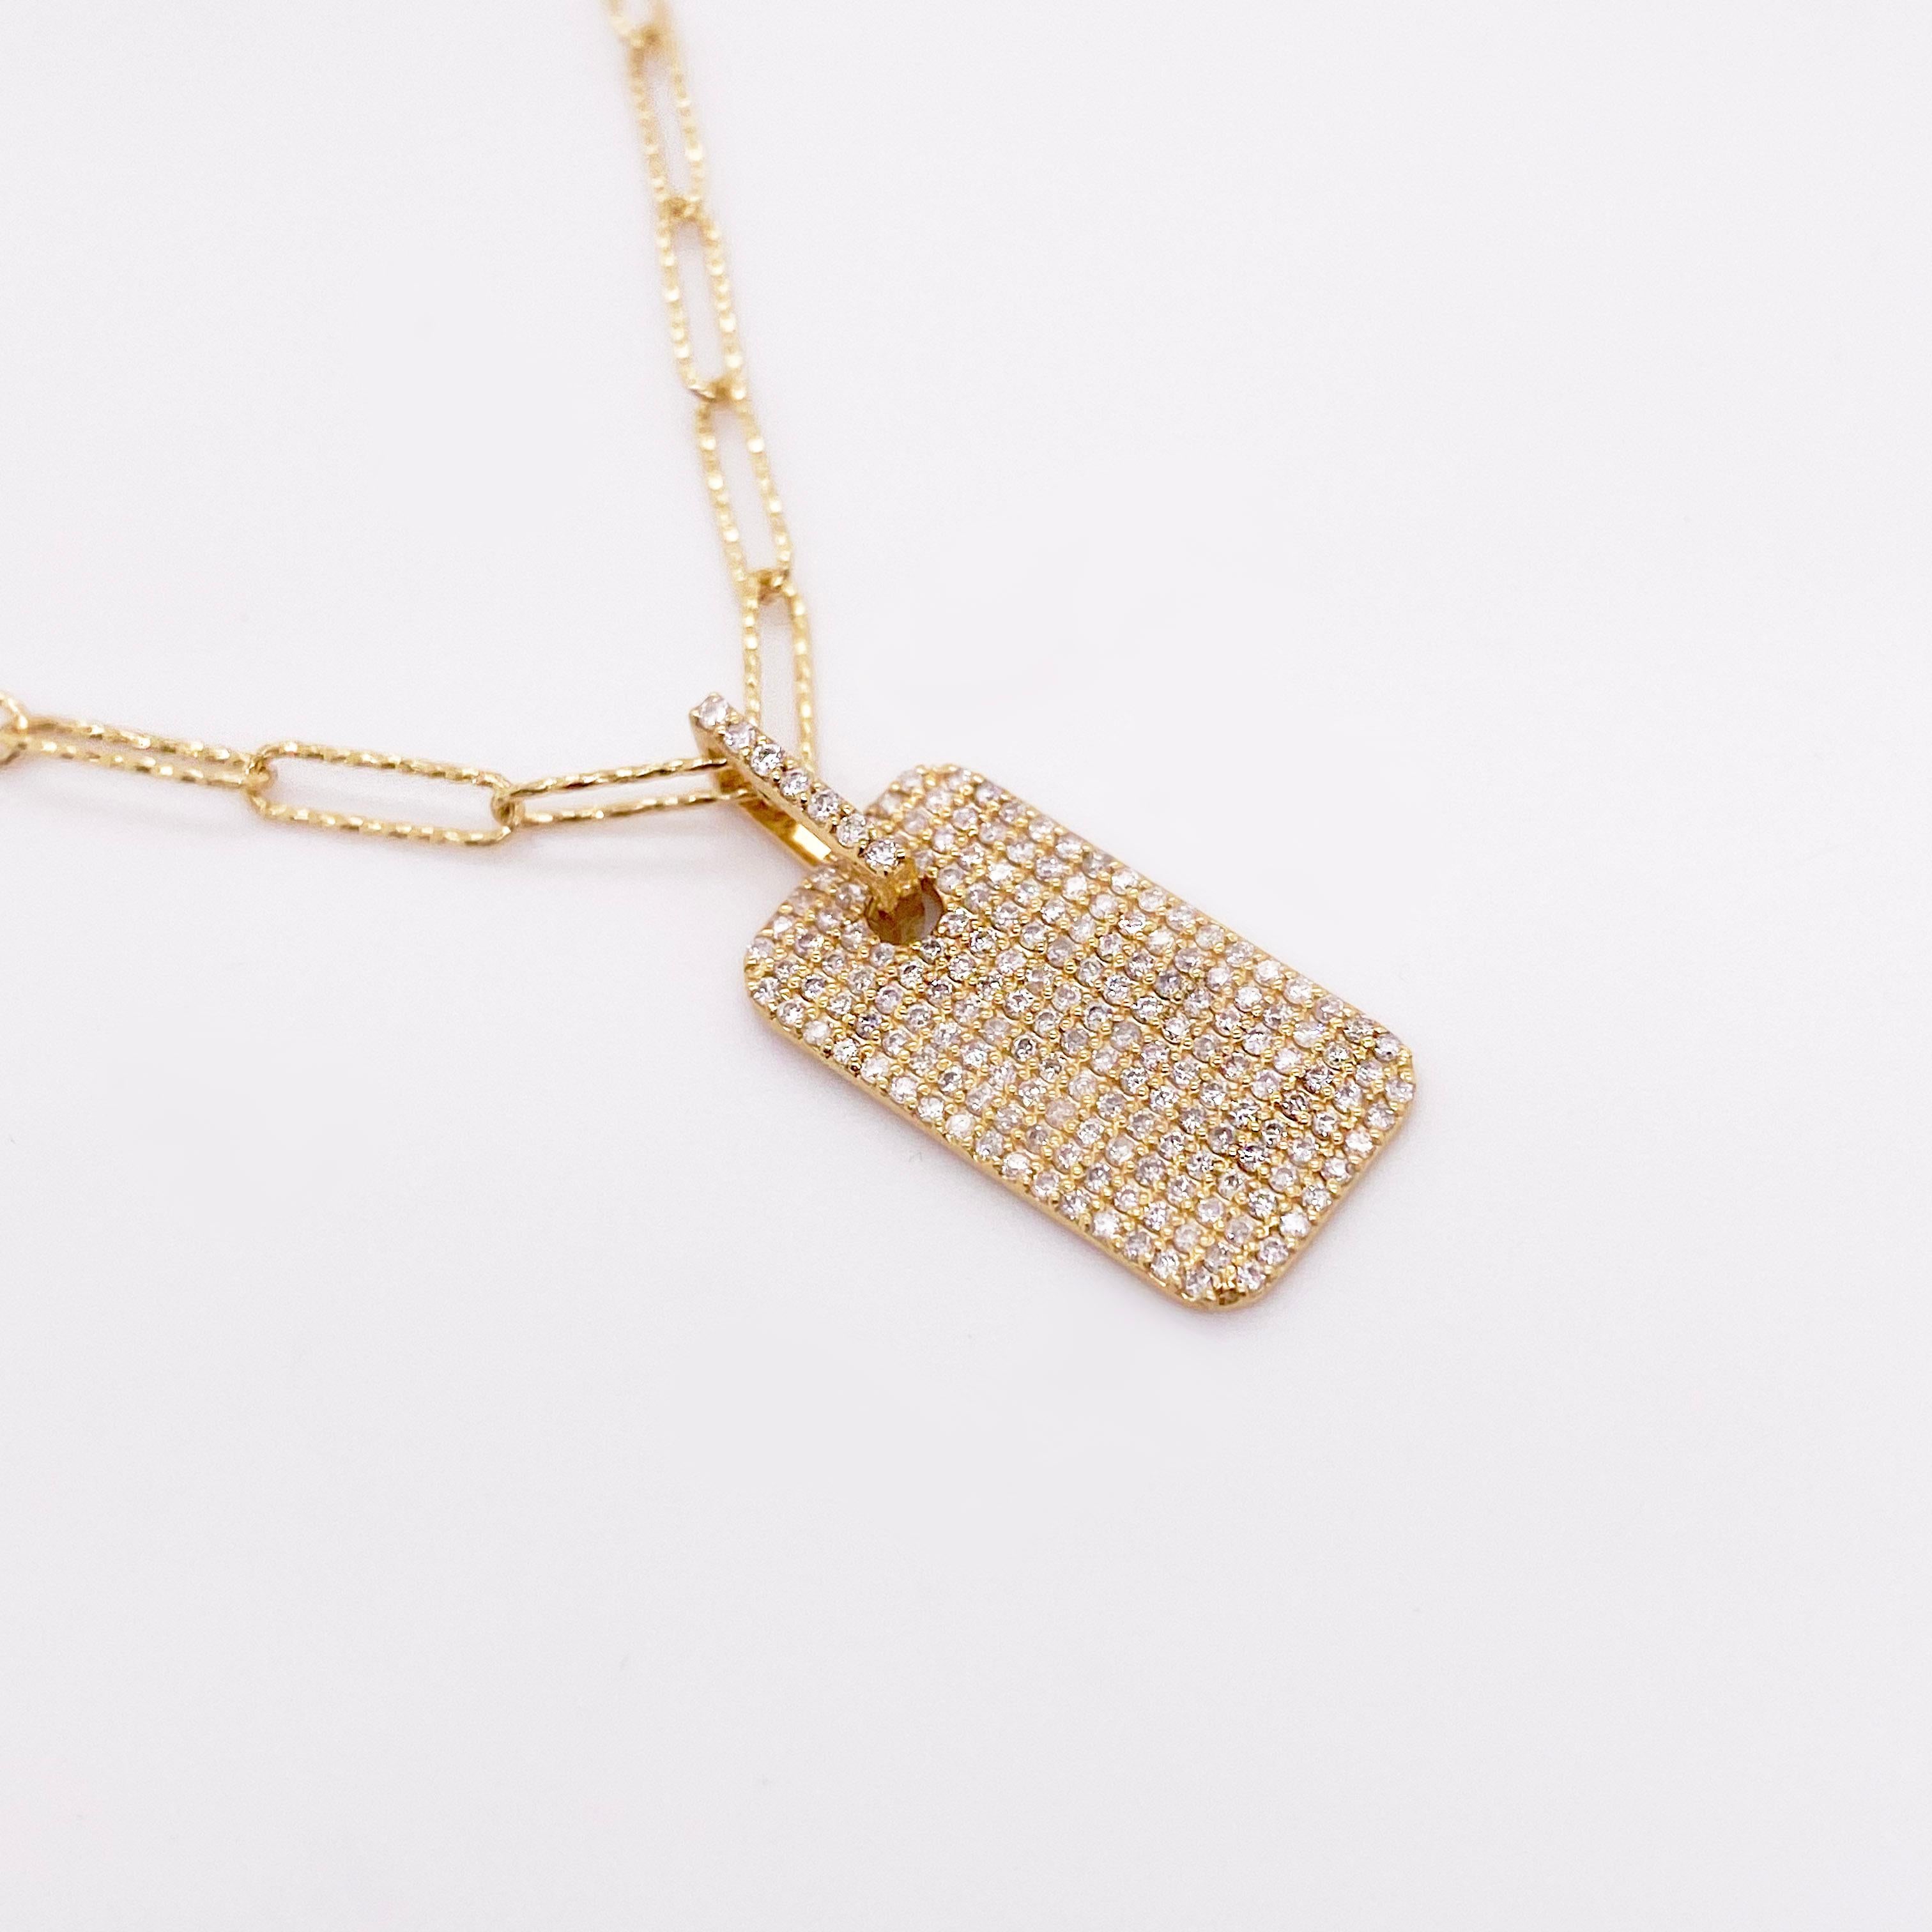 This Dog Tag Necklace is solid 14 karat yellow gold with diamonds that make it sparkle from every angle. The paperclip chain is diamond cut so that it glitters almost as much as the dog tag pendant. This necklace is beyond stunning and a great